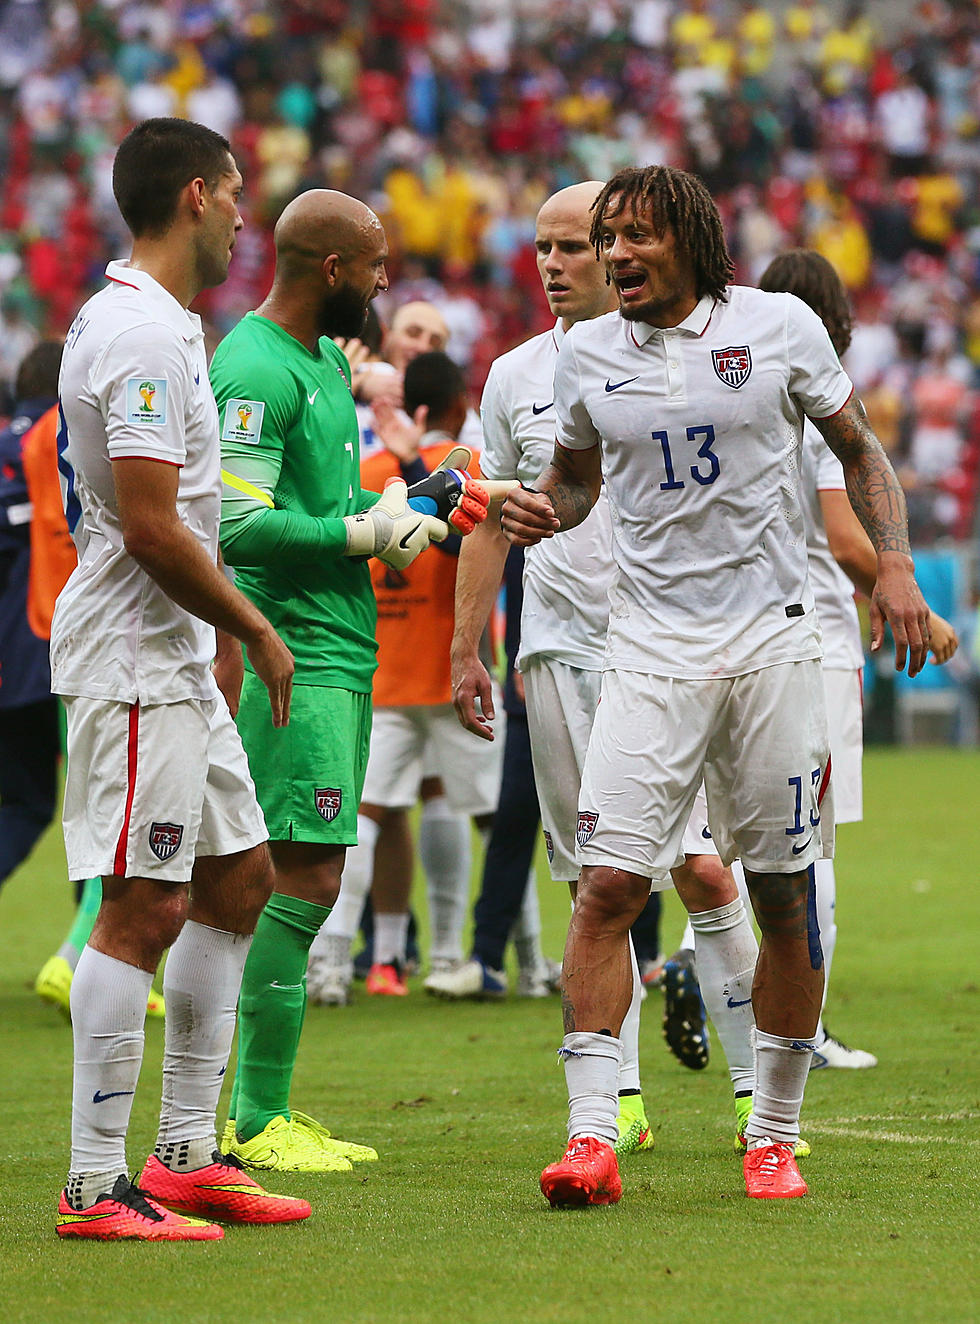 2014 FIFA World Cup: U.S. Loses 1-0 to Germany, But Still Advances